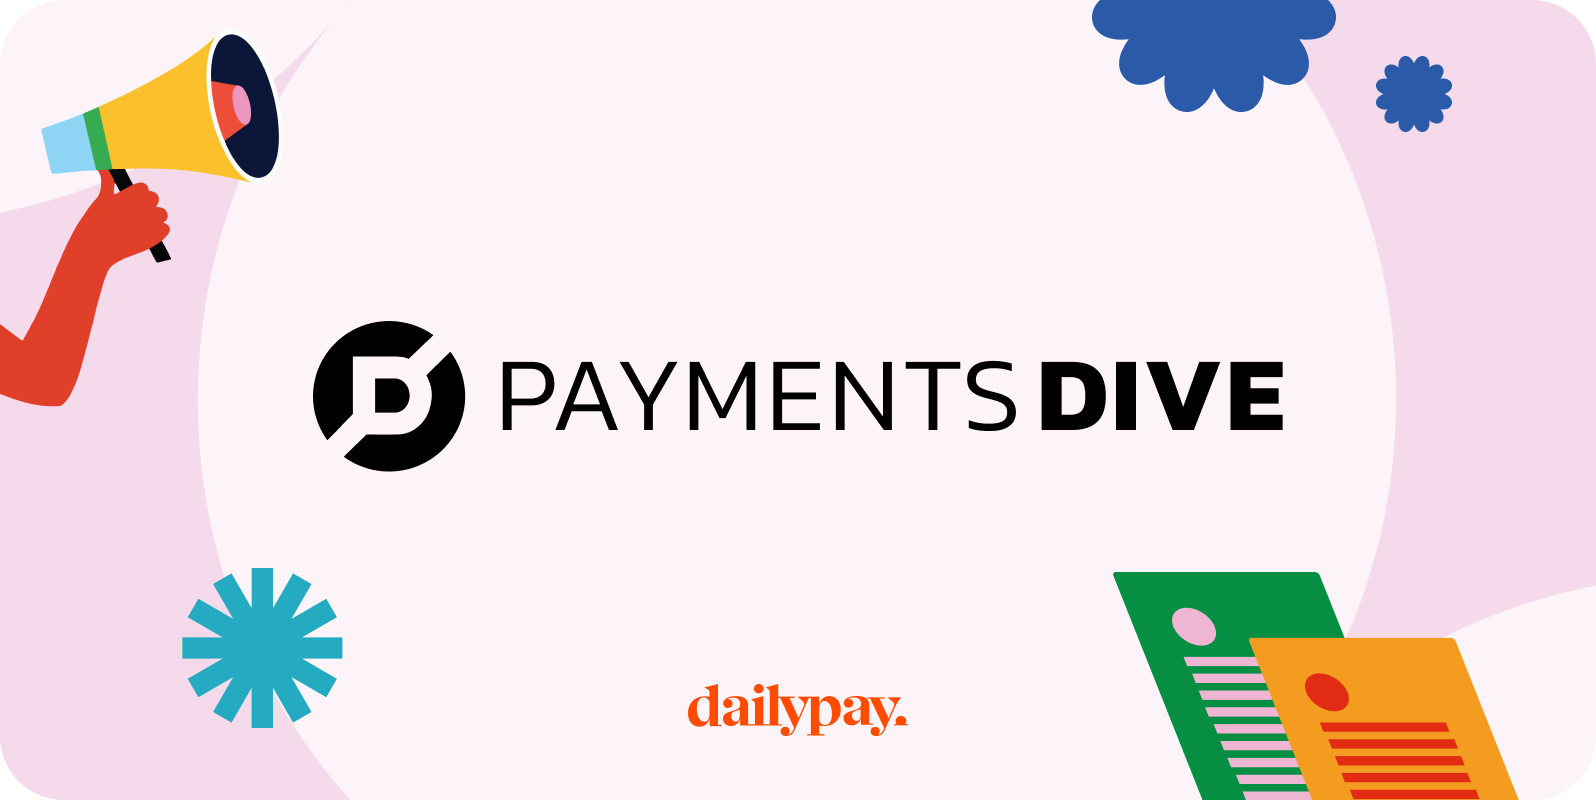 A graphical image with "Payments Dive" logo centered, surrounded by colorful abstract shapes and a hand holding a megaphone. The "dailypay" logo is at the bottom.